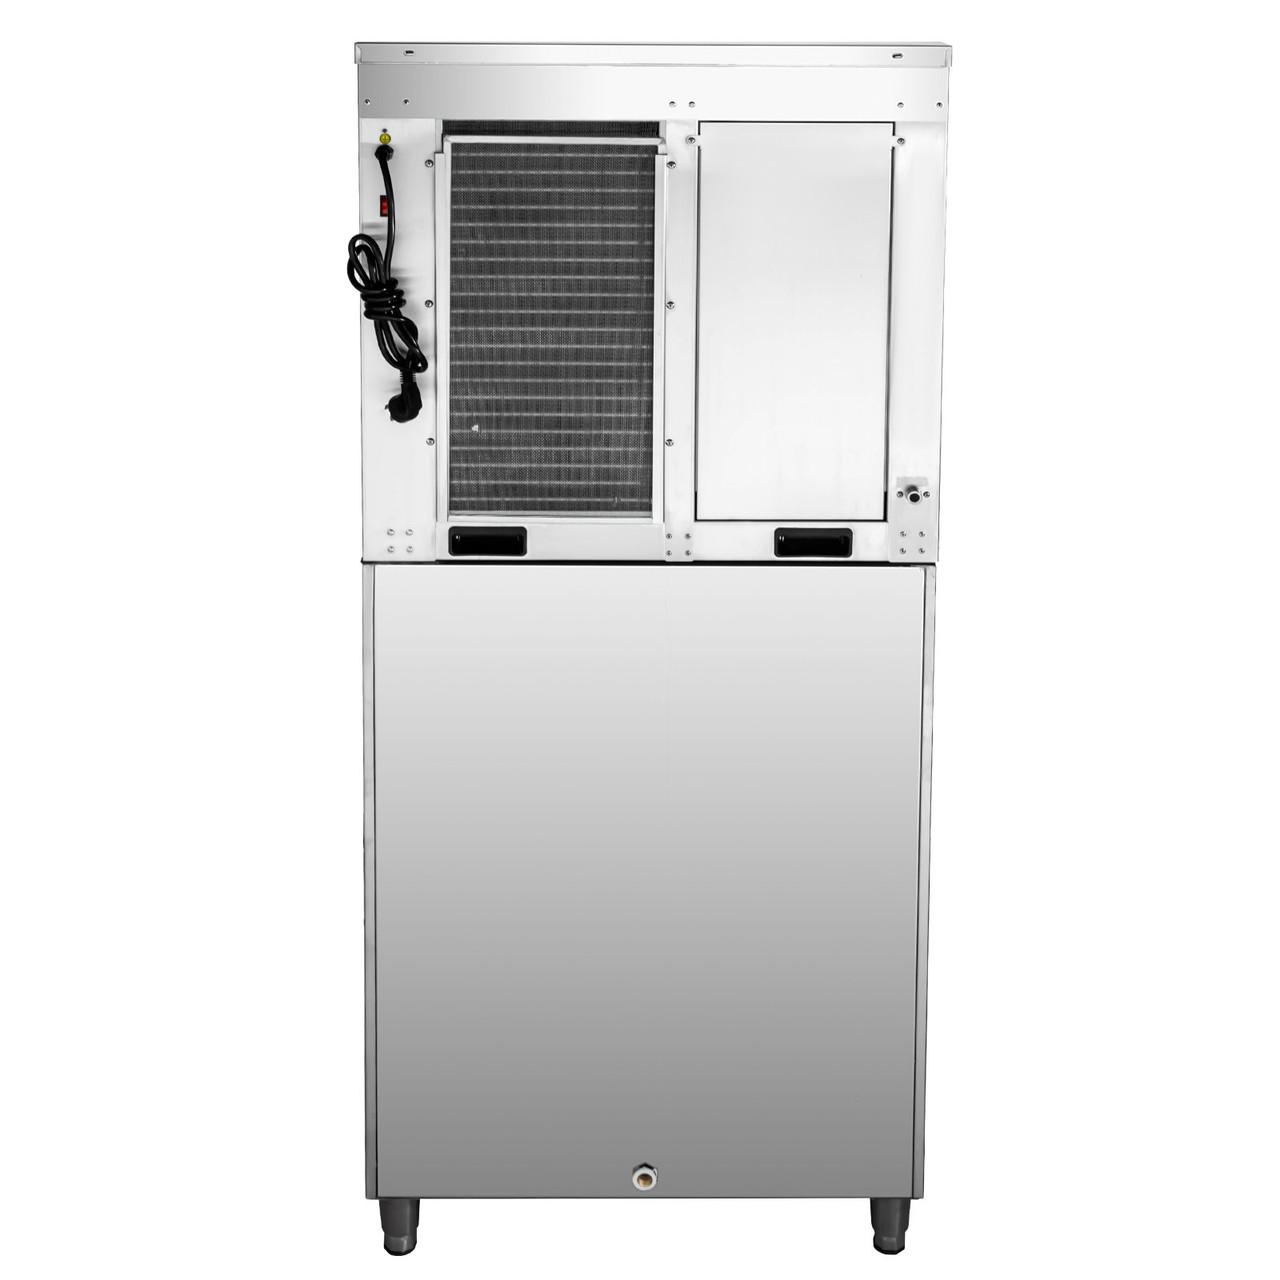 VEVOR Slice Ice Machine 570 LBS/24 H Ice-Making Capacity Slice Flake Ice Maker with 529 LBS Ice Storage Capacity Slice Flake Ice Machine Split-Type Slice Ice Maker with Water Filters for Cafeteria